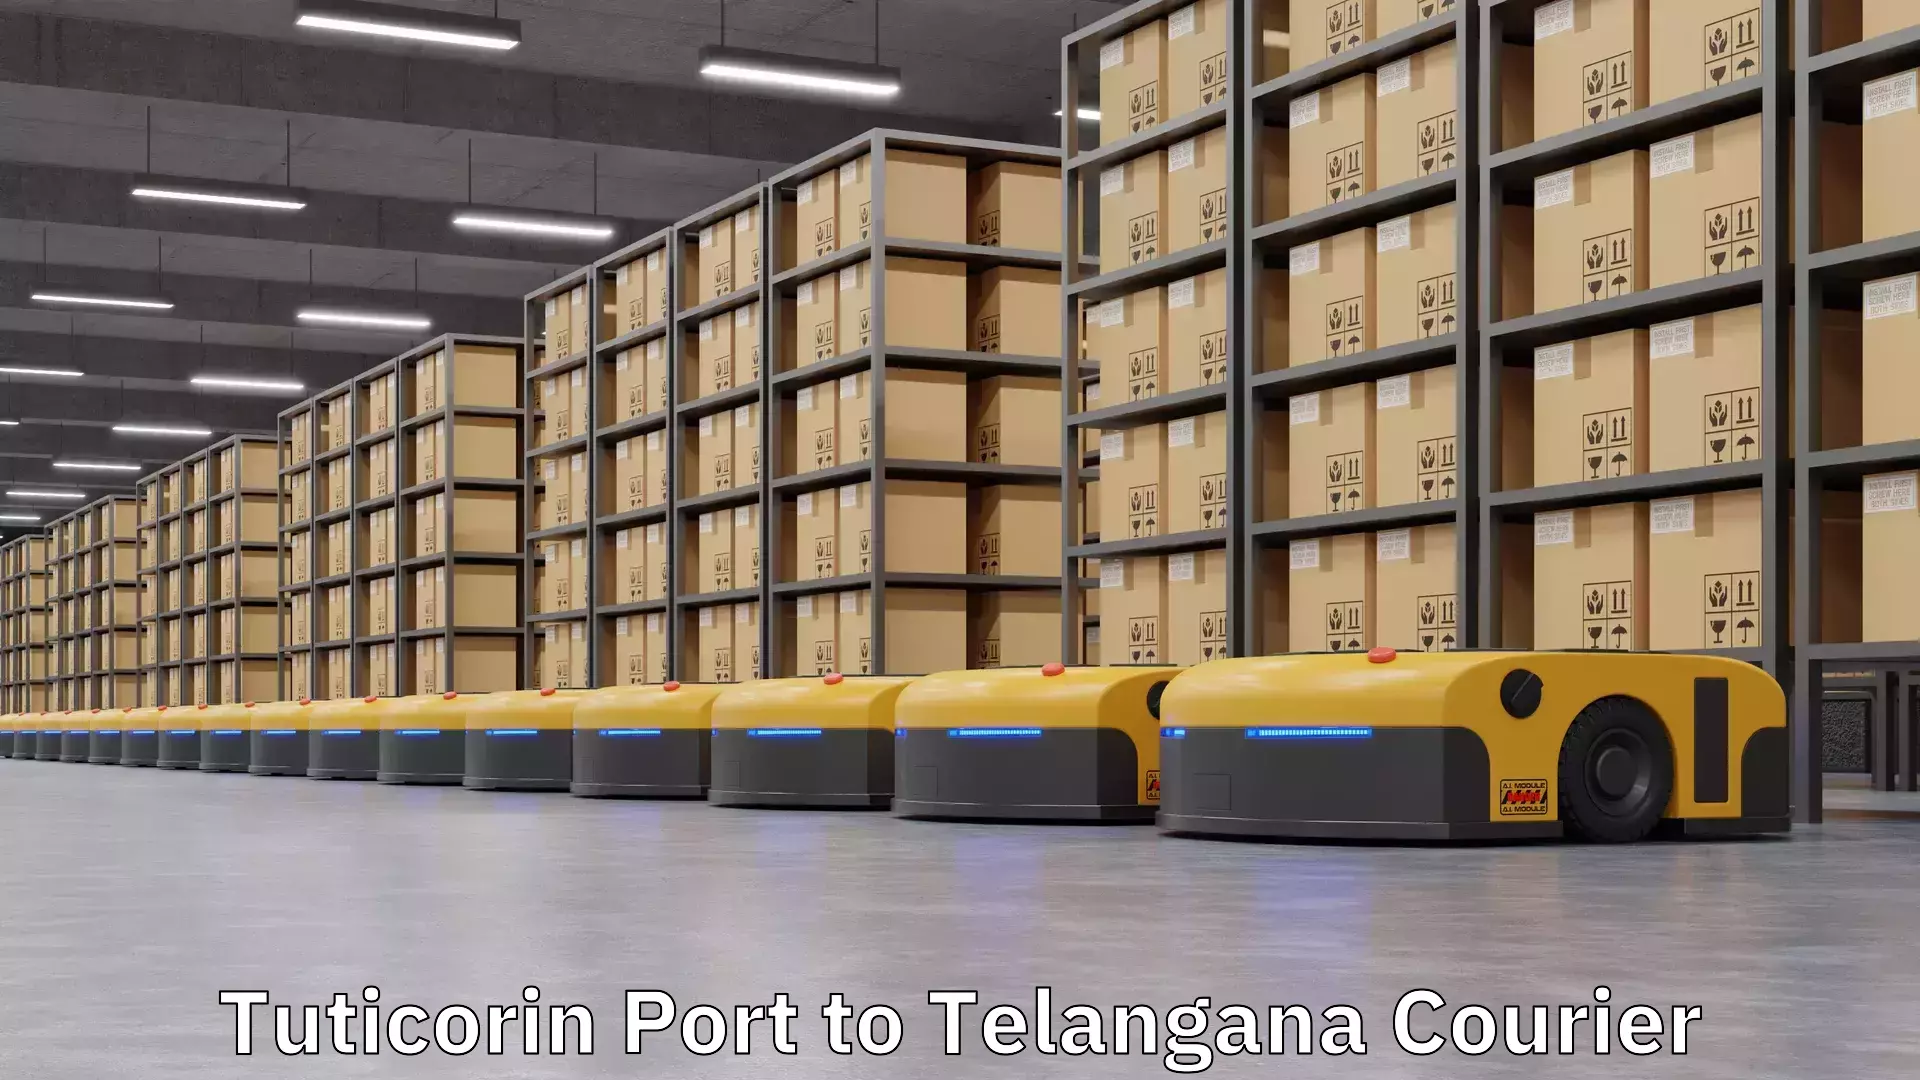 Business delivery service Tuticorin Port to Telangana